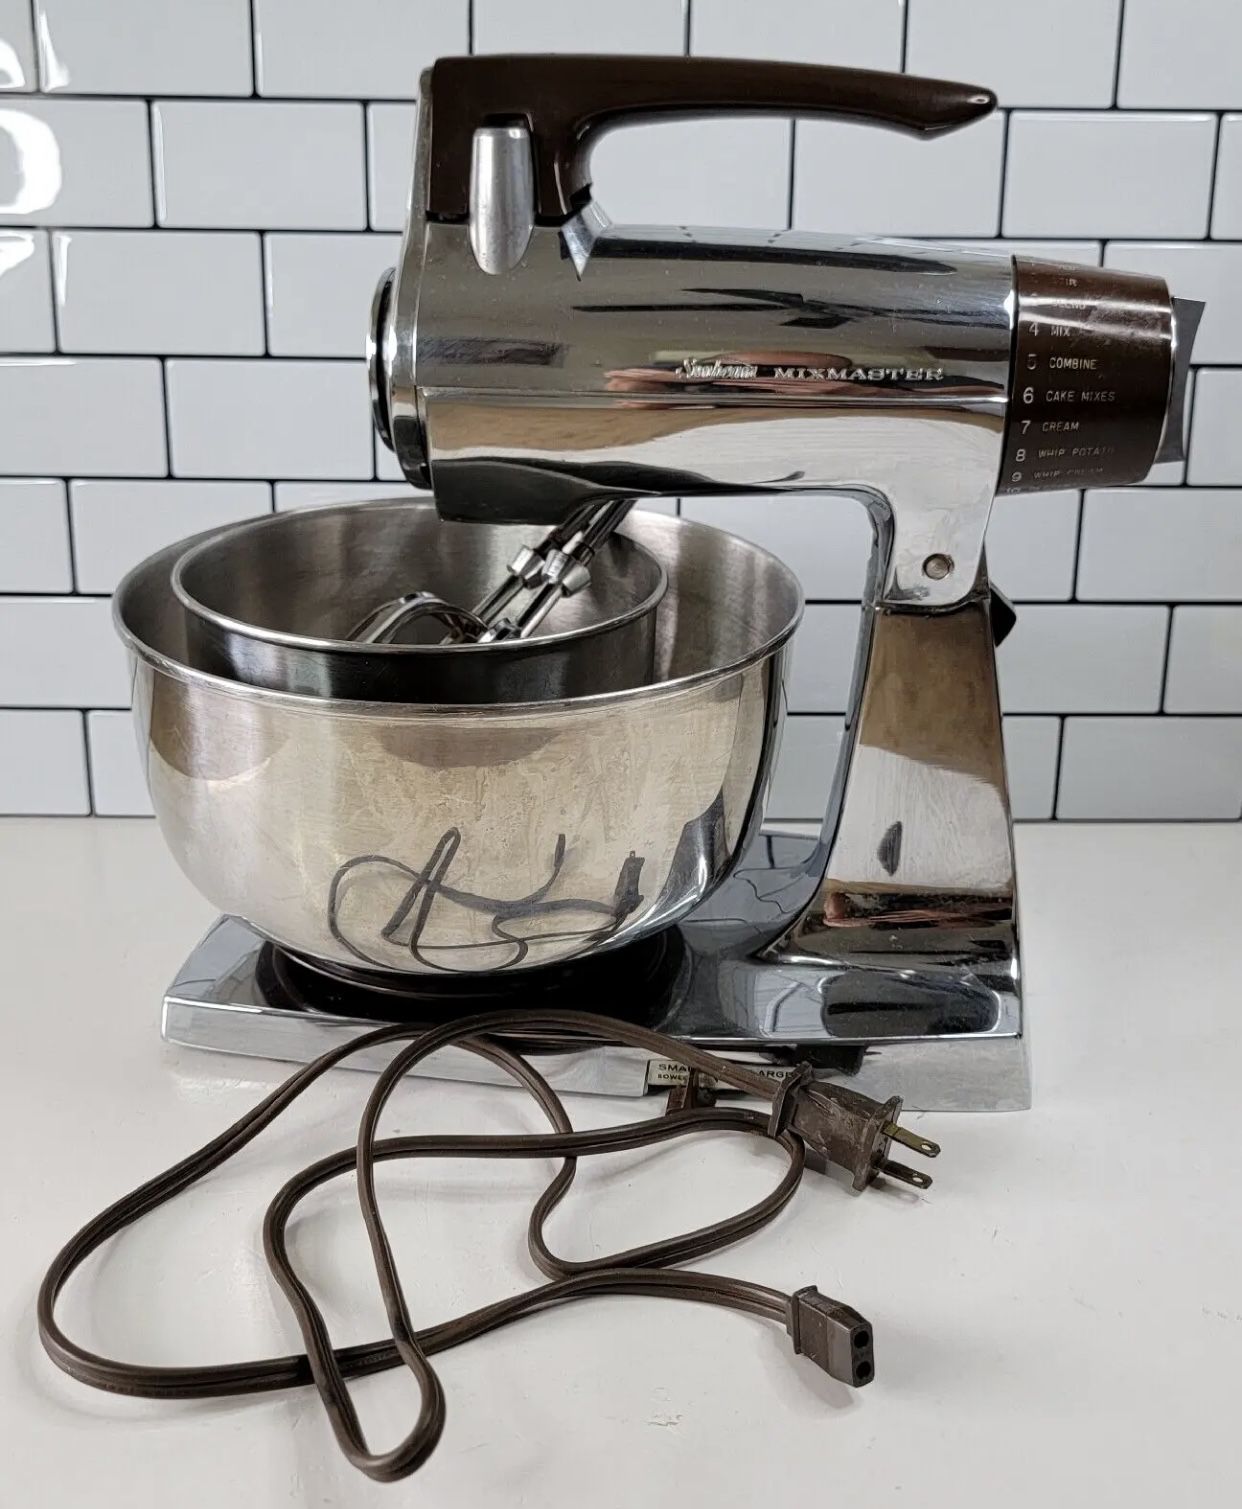 Sunbeam Mixer With Attachments for Sale in Orlando, FL - OfferUp